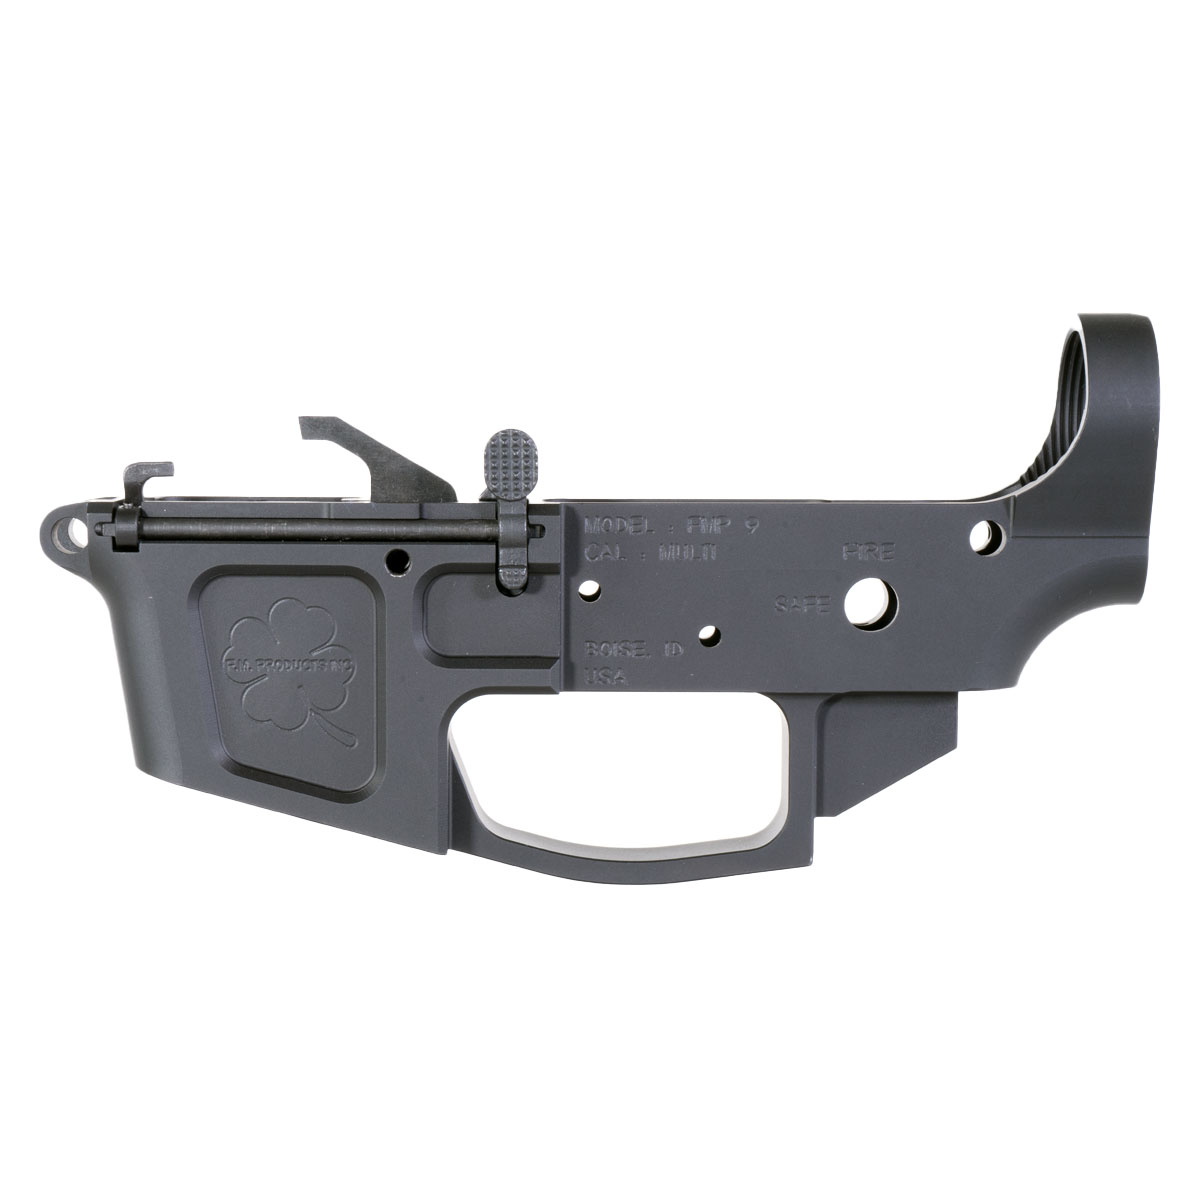 Foxtrot Mike Products Stripped 9mm AR-15 Lower Receiver